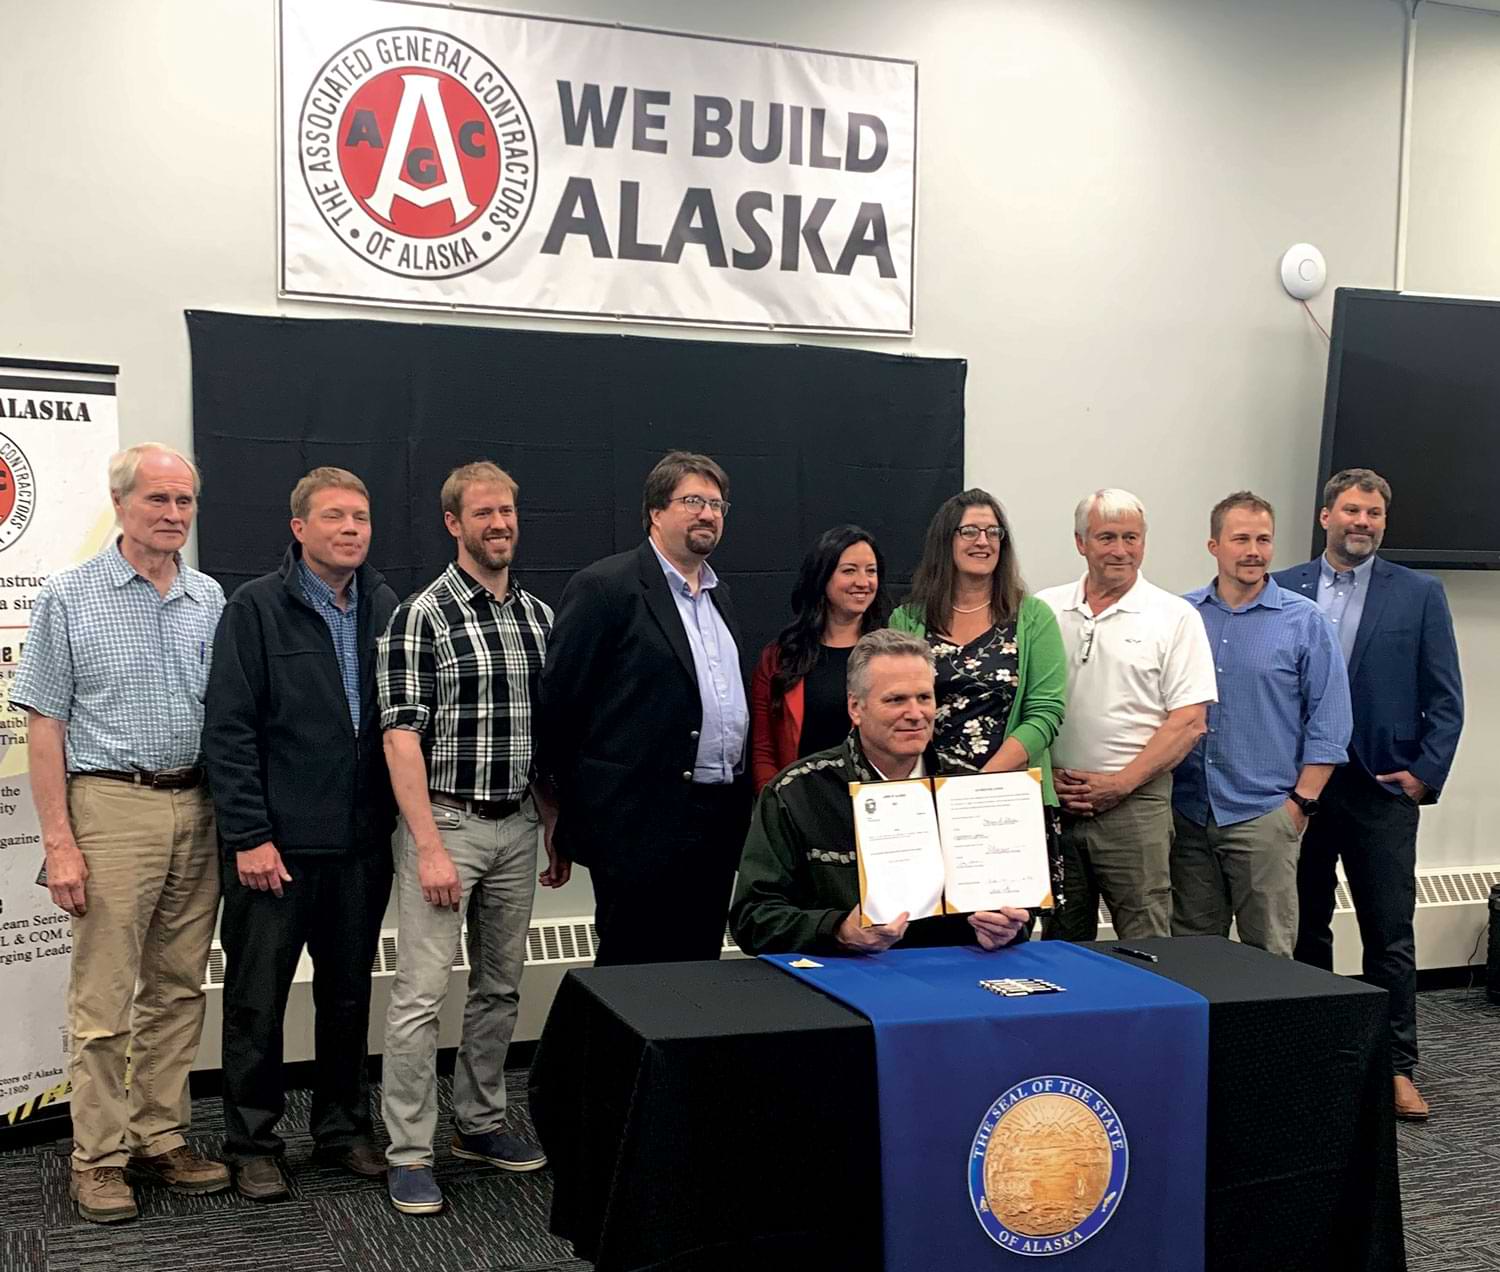 Associated General Contractors of Alaska is proud of its partnership with Governor Mike Dunleavy and Alaska Department of Transportation & Public Facilities to pass HB160, which codifies the Construction Manager/General Contractor procurement method as another tool in the DOT&PF toolbox